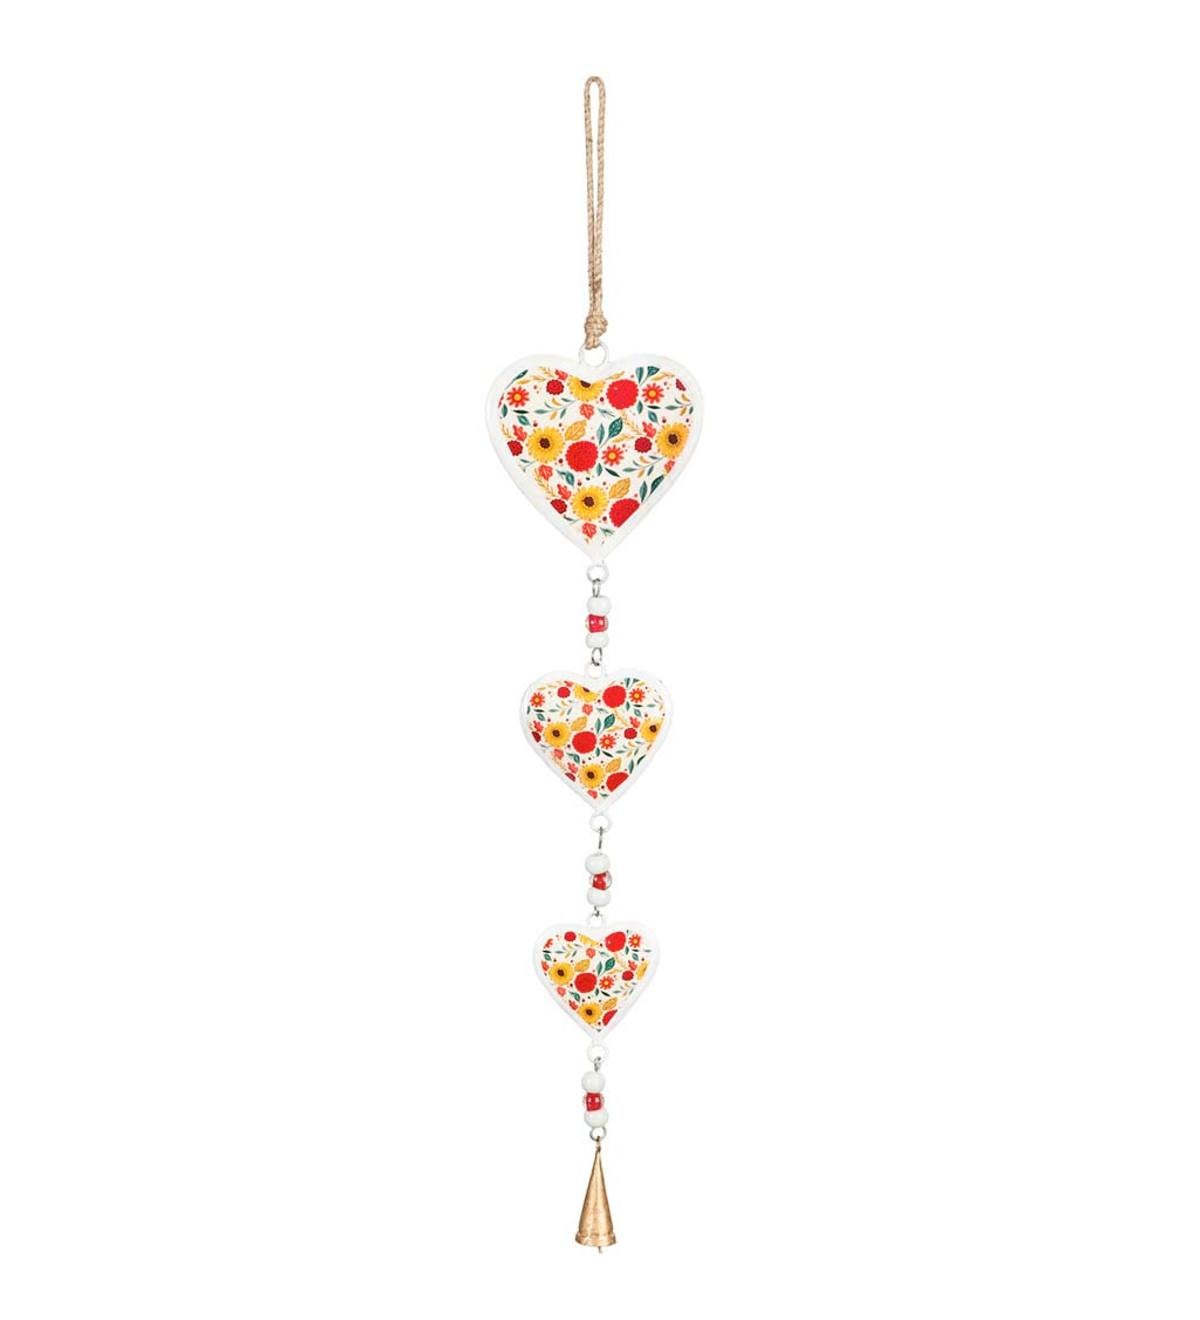 Blooming Floral Hanging Heart Decor with Bell